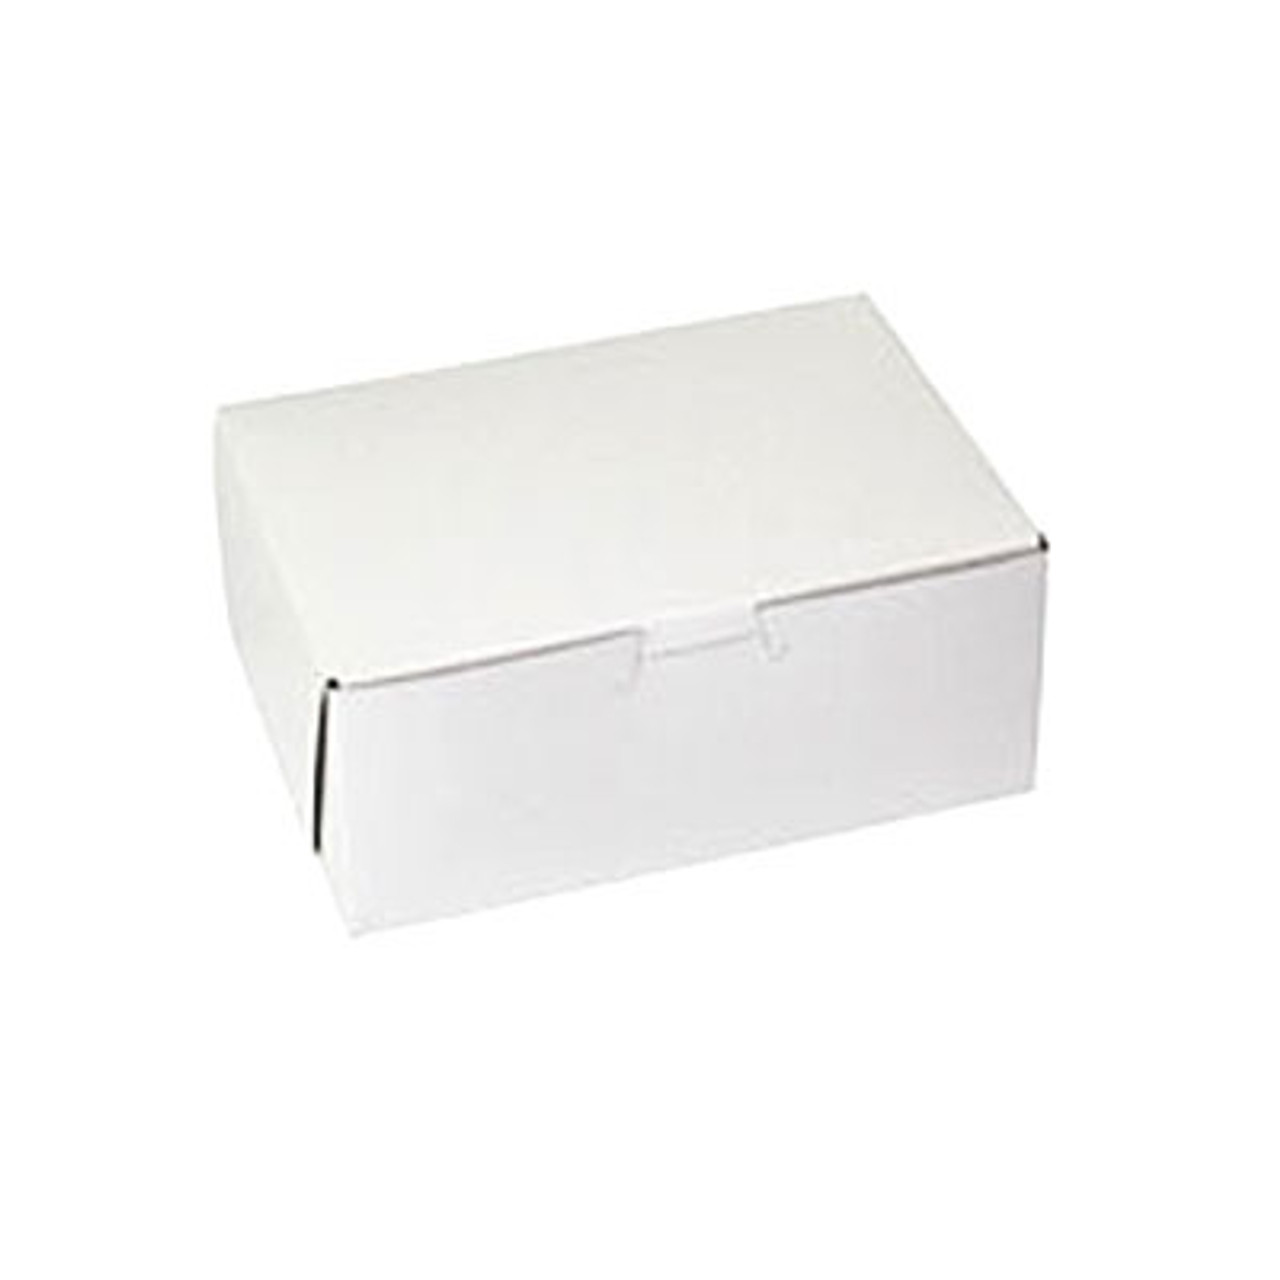 7" x 7" x 3-1/2" White Cupcake Bakery Box to fit 4 Regular Cup Size per 100